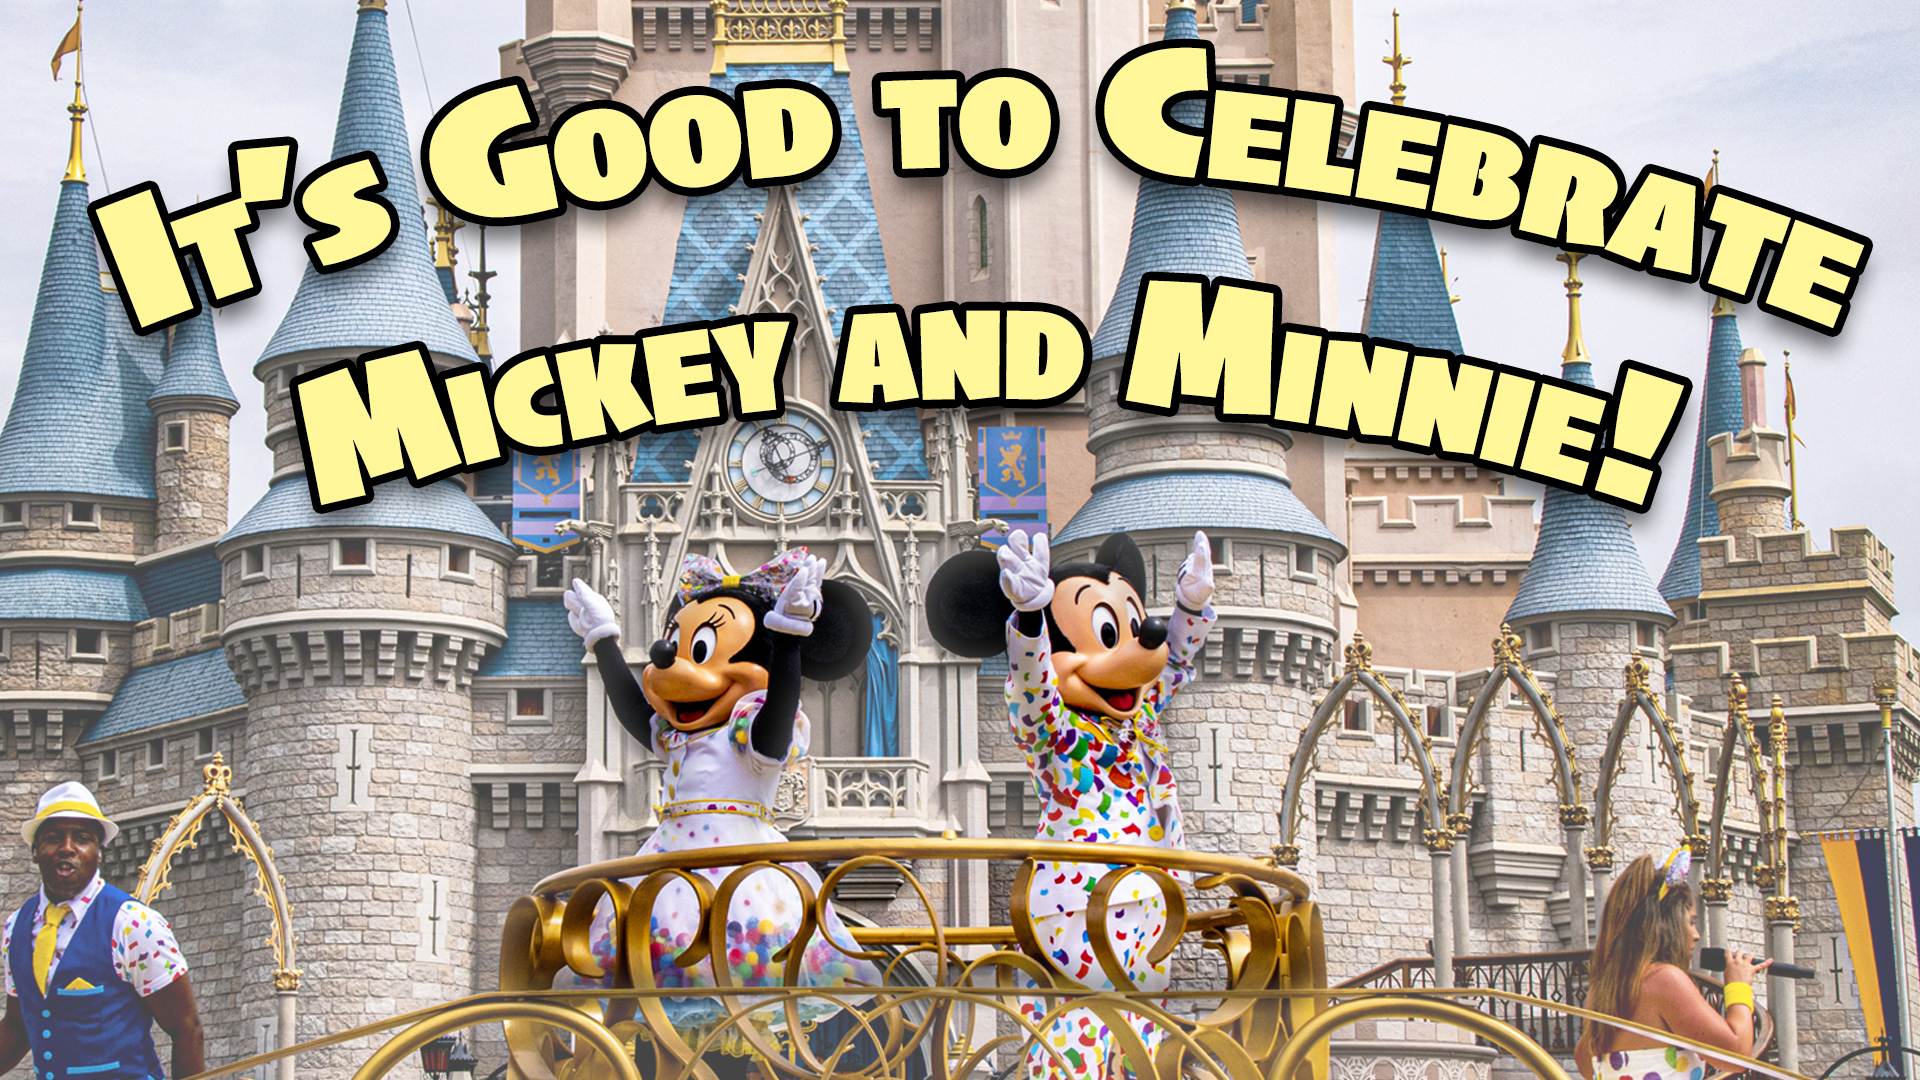 Why It’s Good to Celebrate Mickey and Minnie’s Birthday This Year